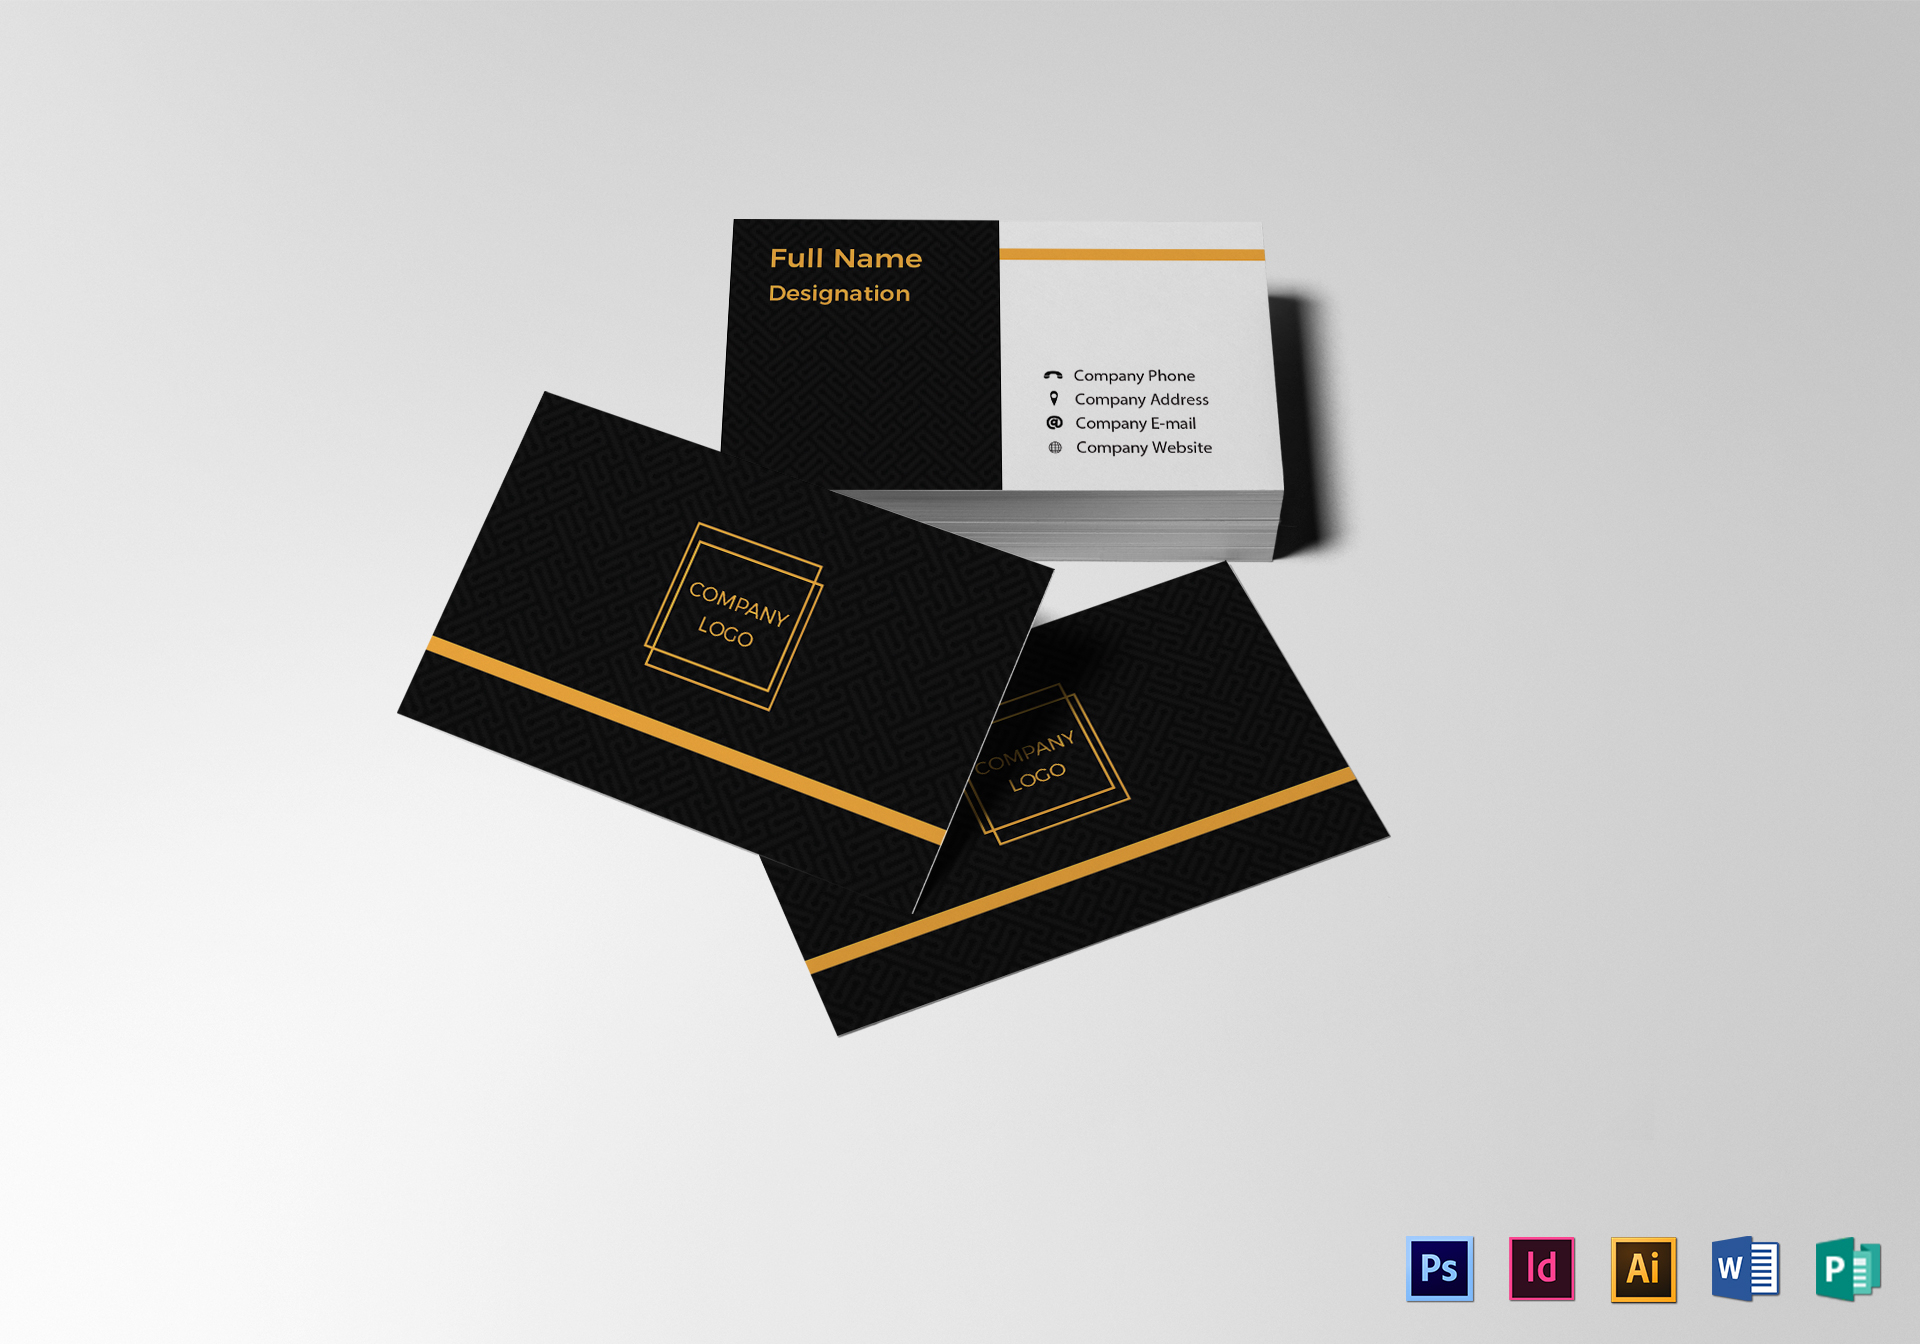 Blank Business Card Template For Company Business Cards Templates